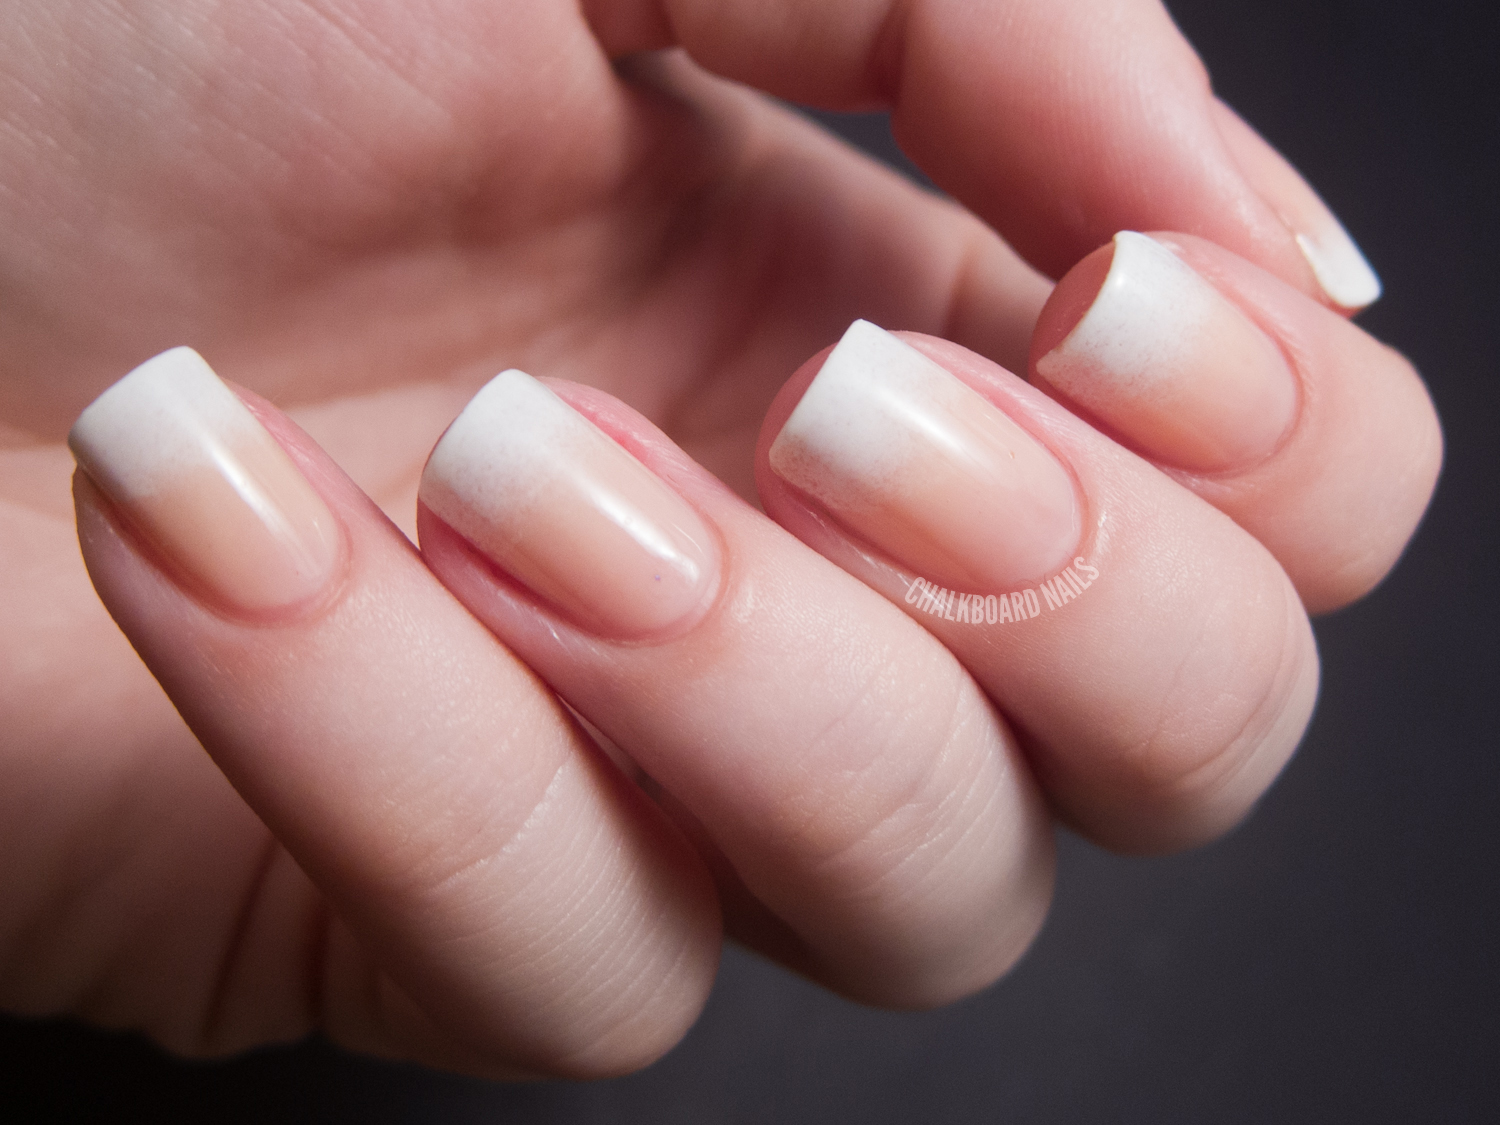 1. "French Manicure Nail Designs on Tumblr" - wide 9